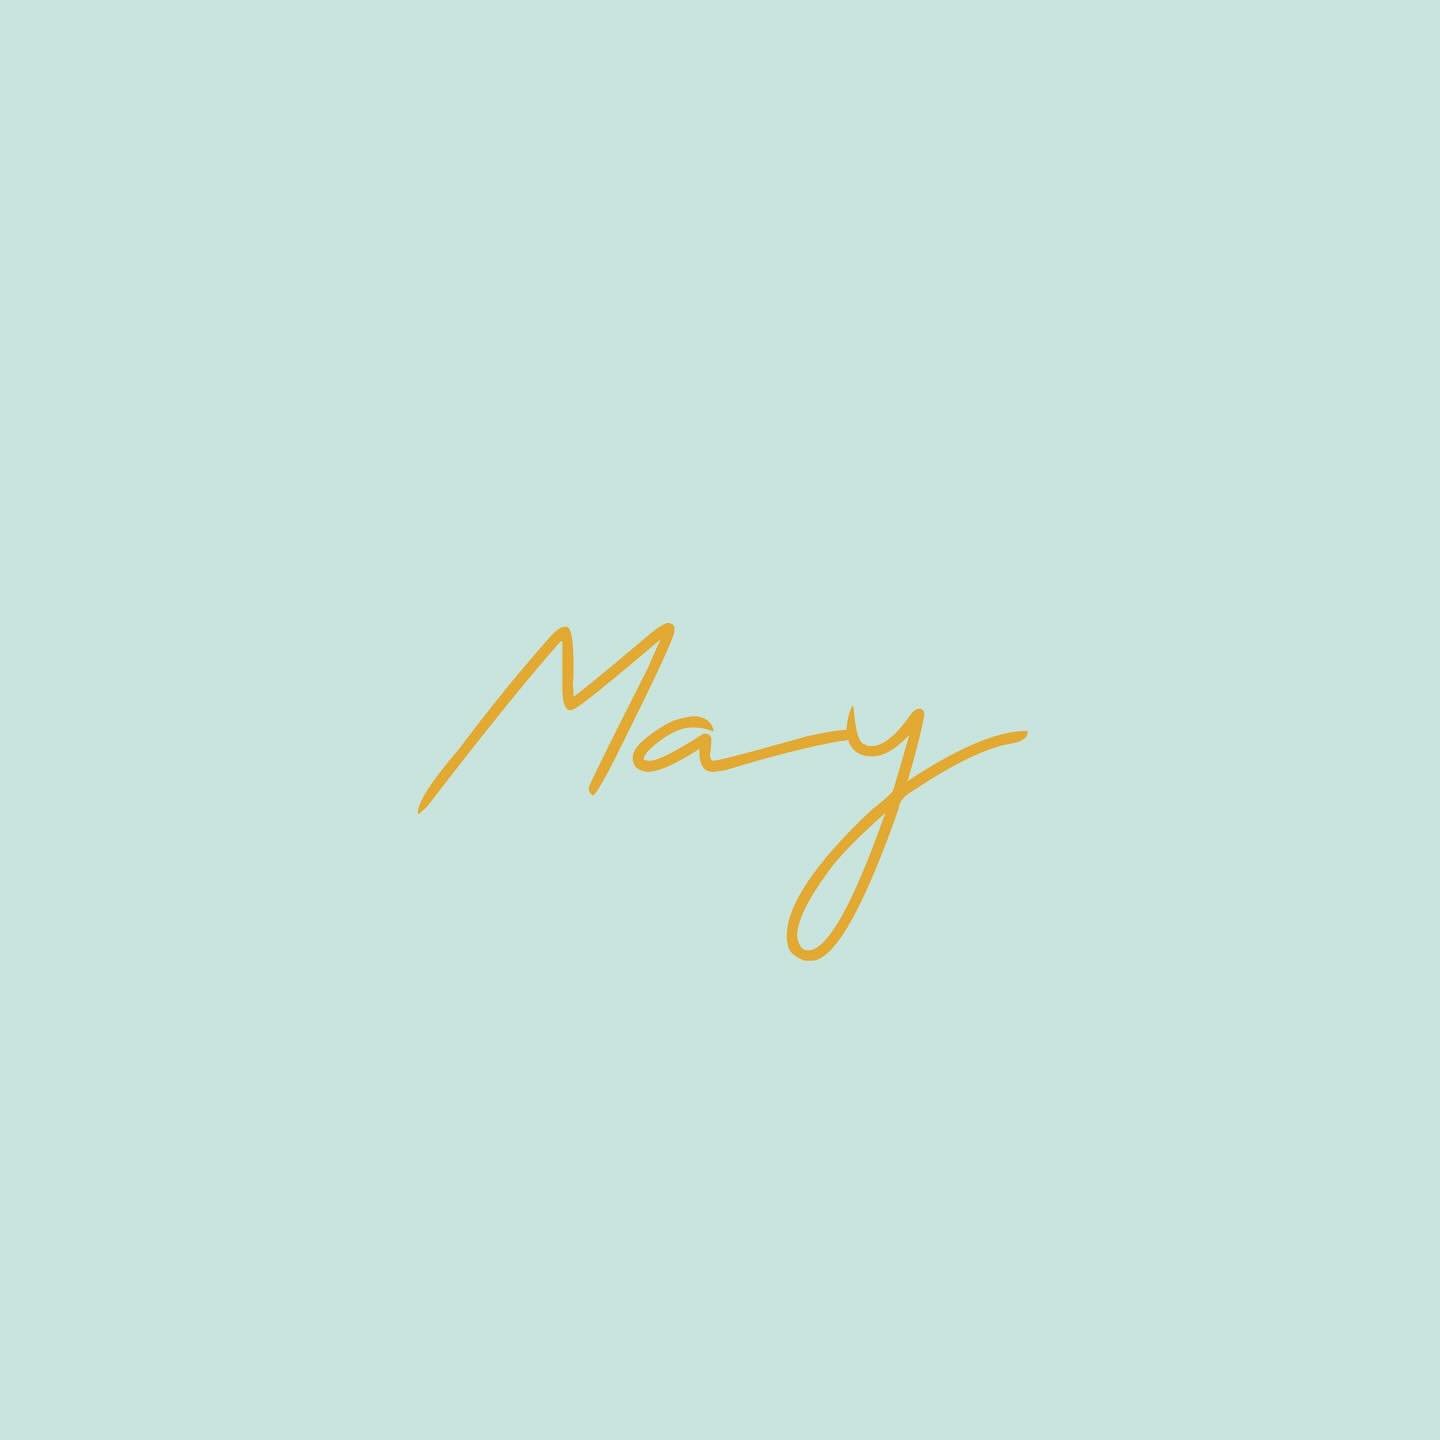 Hello May! 
// May, more than any other month of the year, wants us to feel most alive // - Fennel Hudson

☀️open wed-sun 11-6🍦

#mayflavors #darlingsonoma #handcraftedicecream #sonoma #sonomaicecreamshop #familyowned #shoplocal